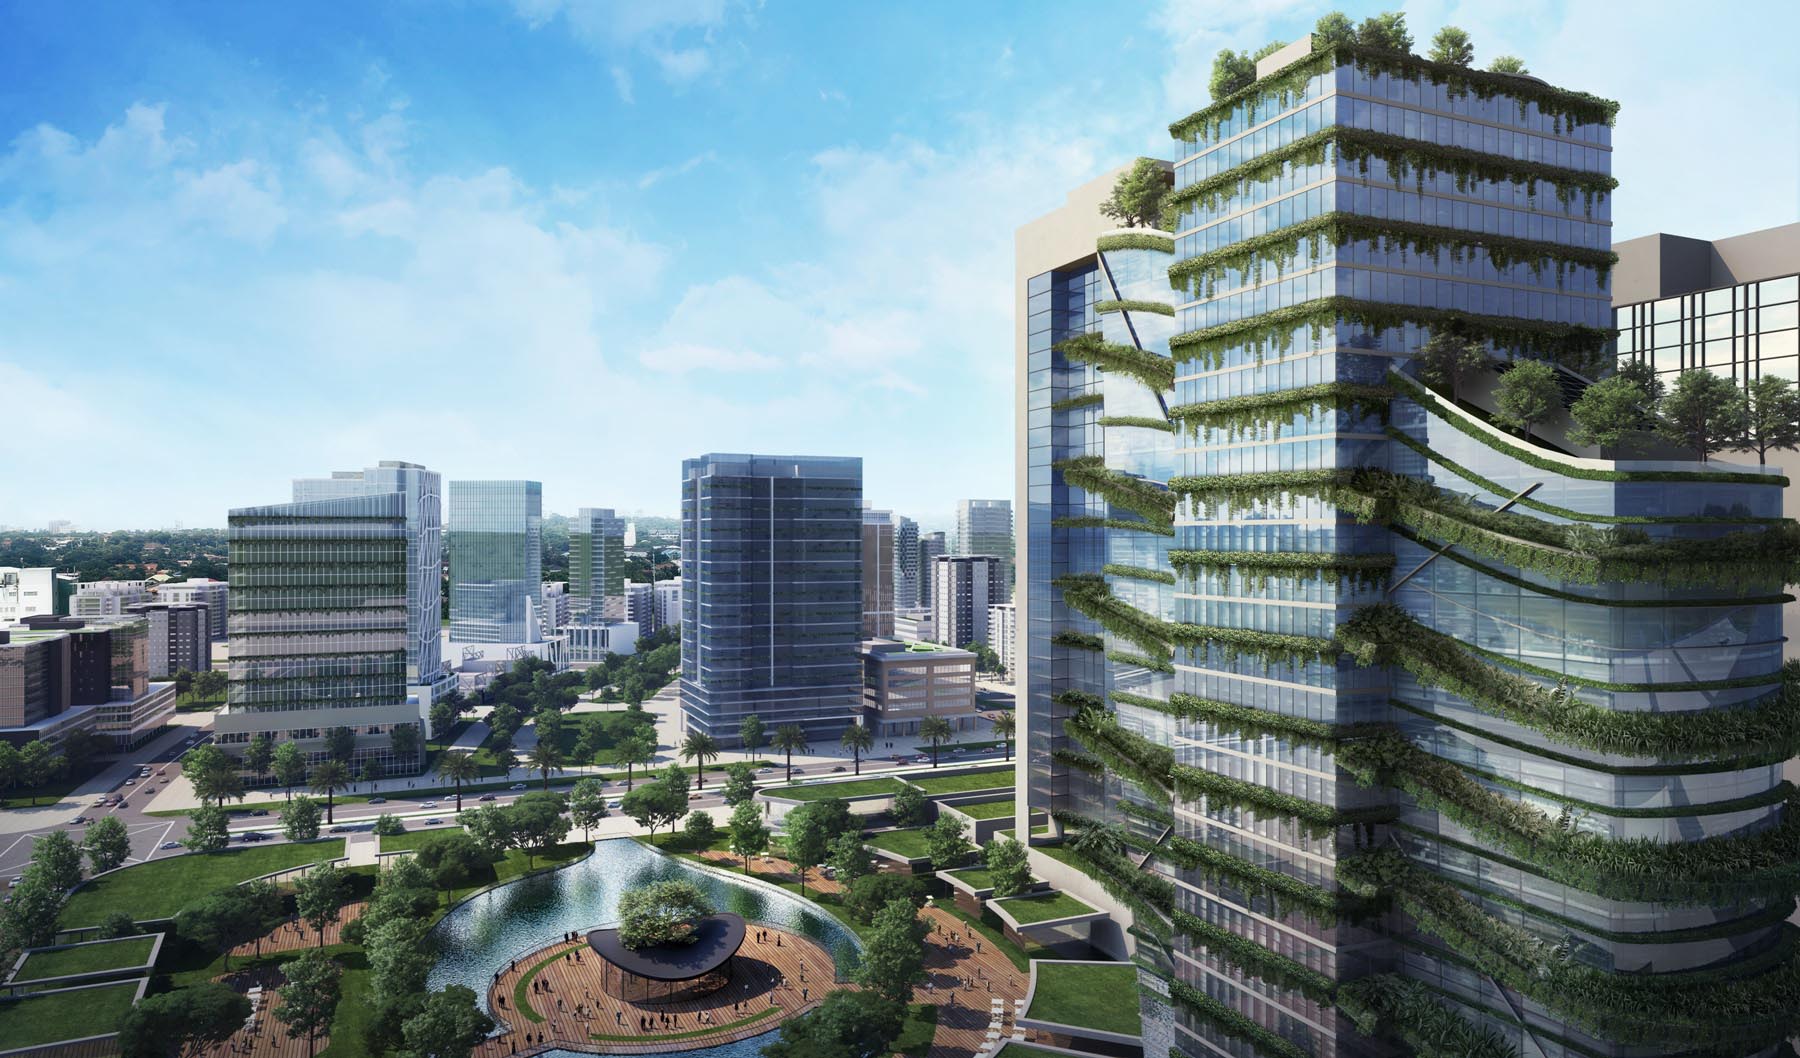 Filinvest New Clark City at the forefront of economic recovery